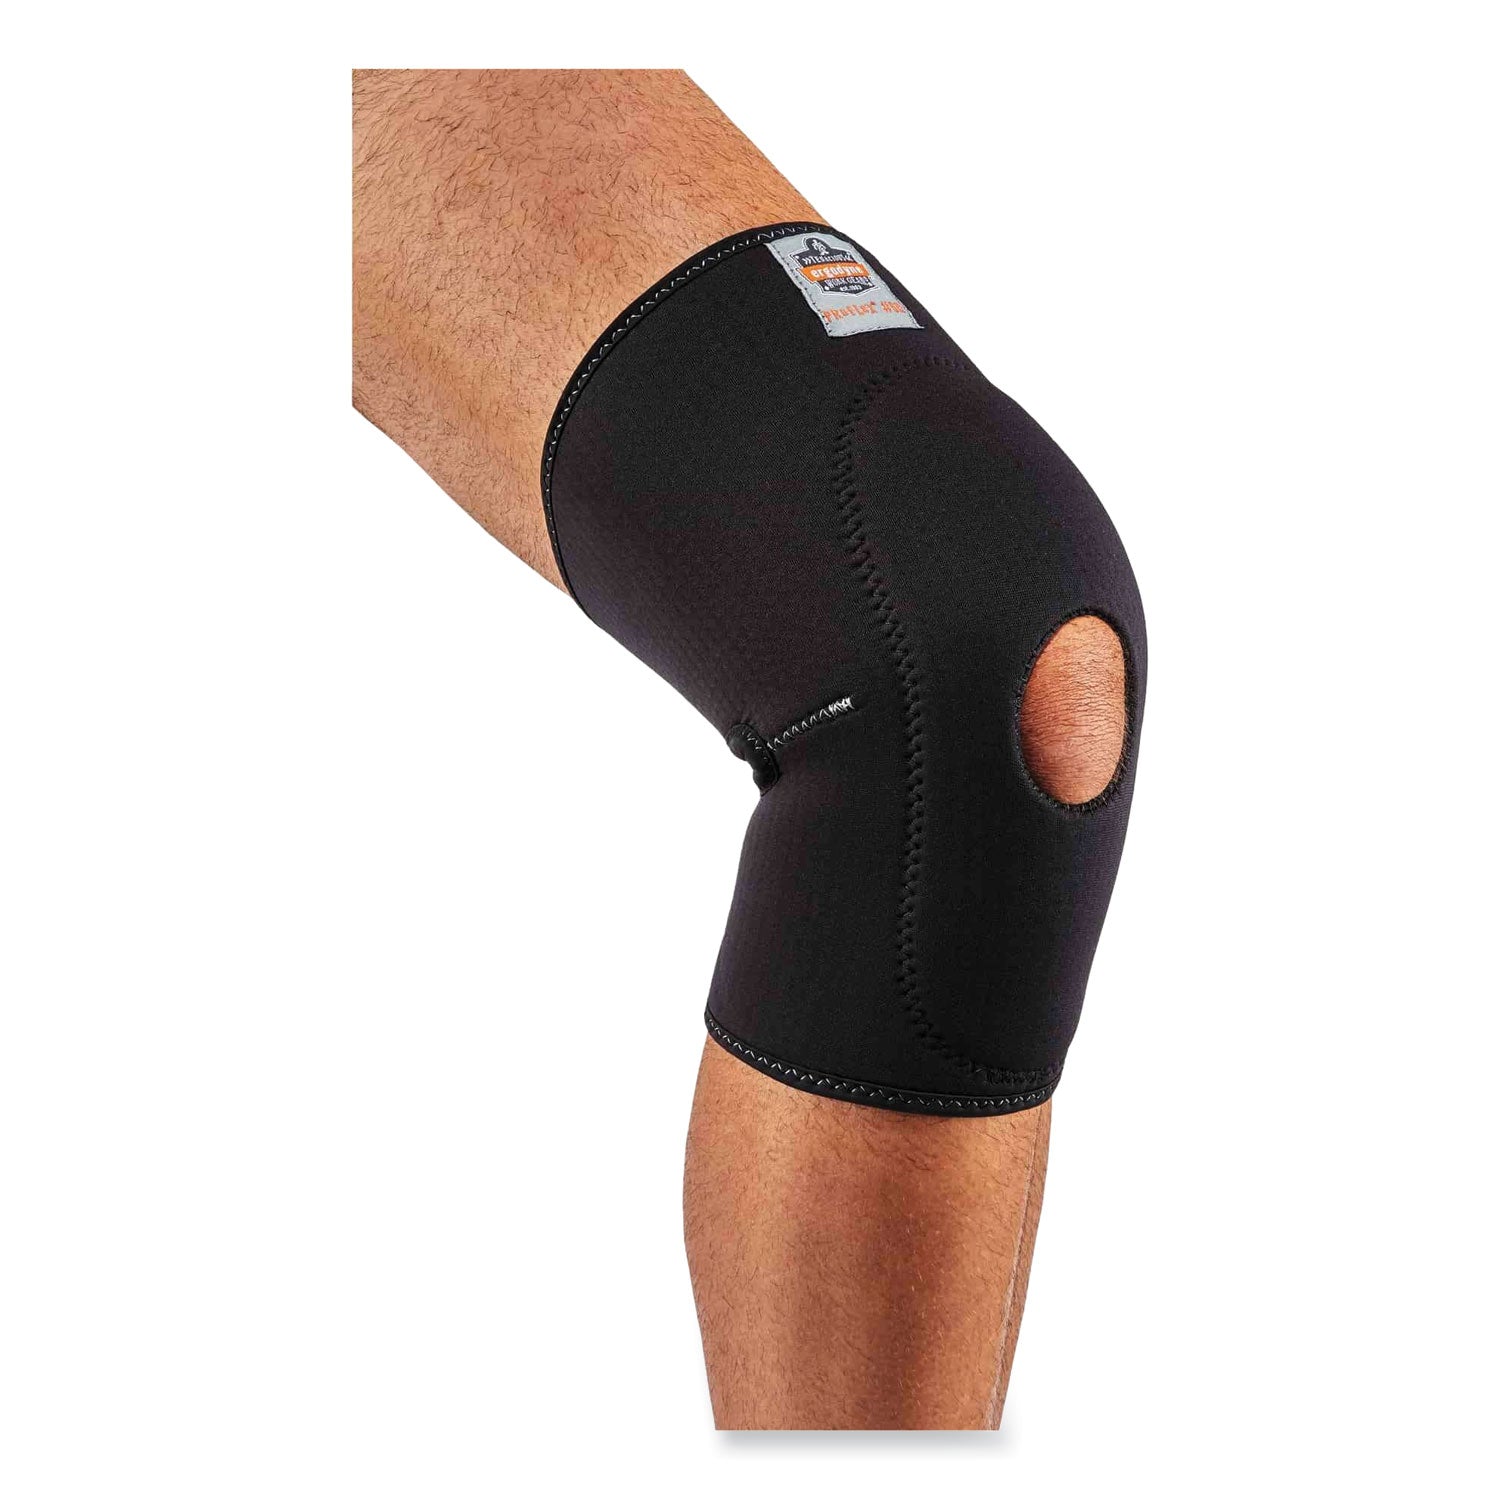 proflex-615-open-patella-anterior-pad-knee-sleeve-large-black-ships-in-1-3-business-days_ego16534 - 4